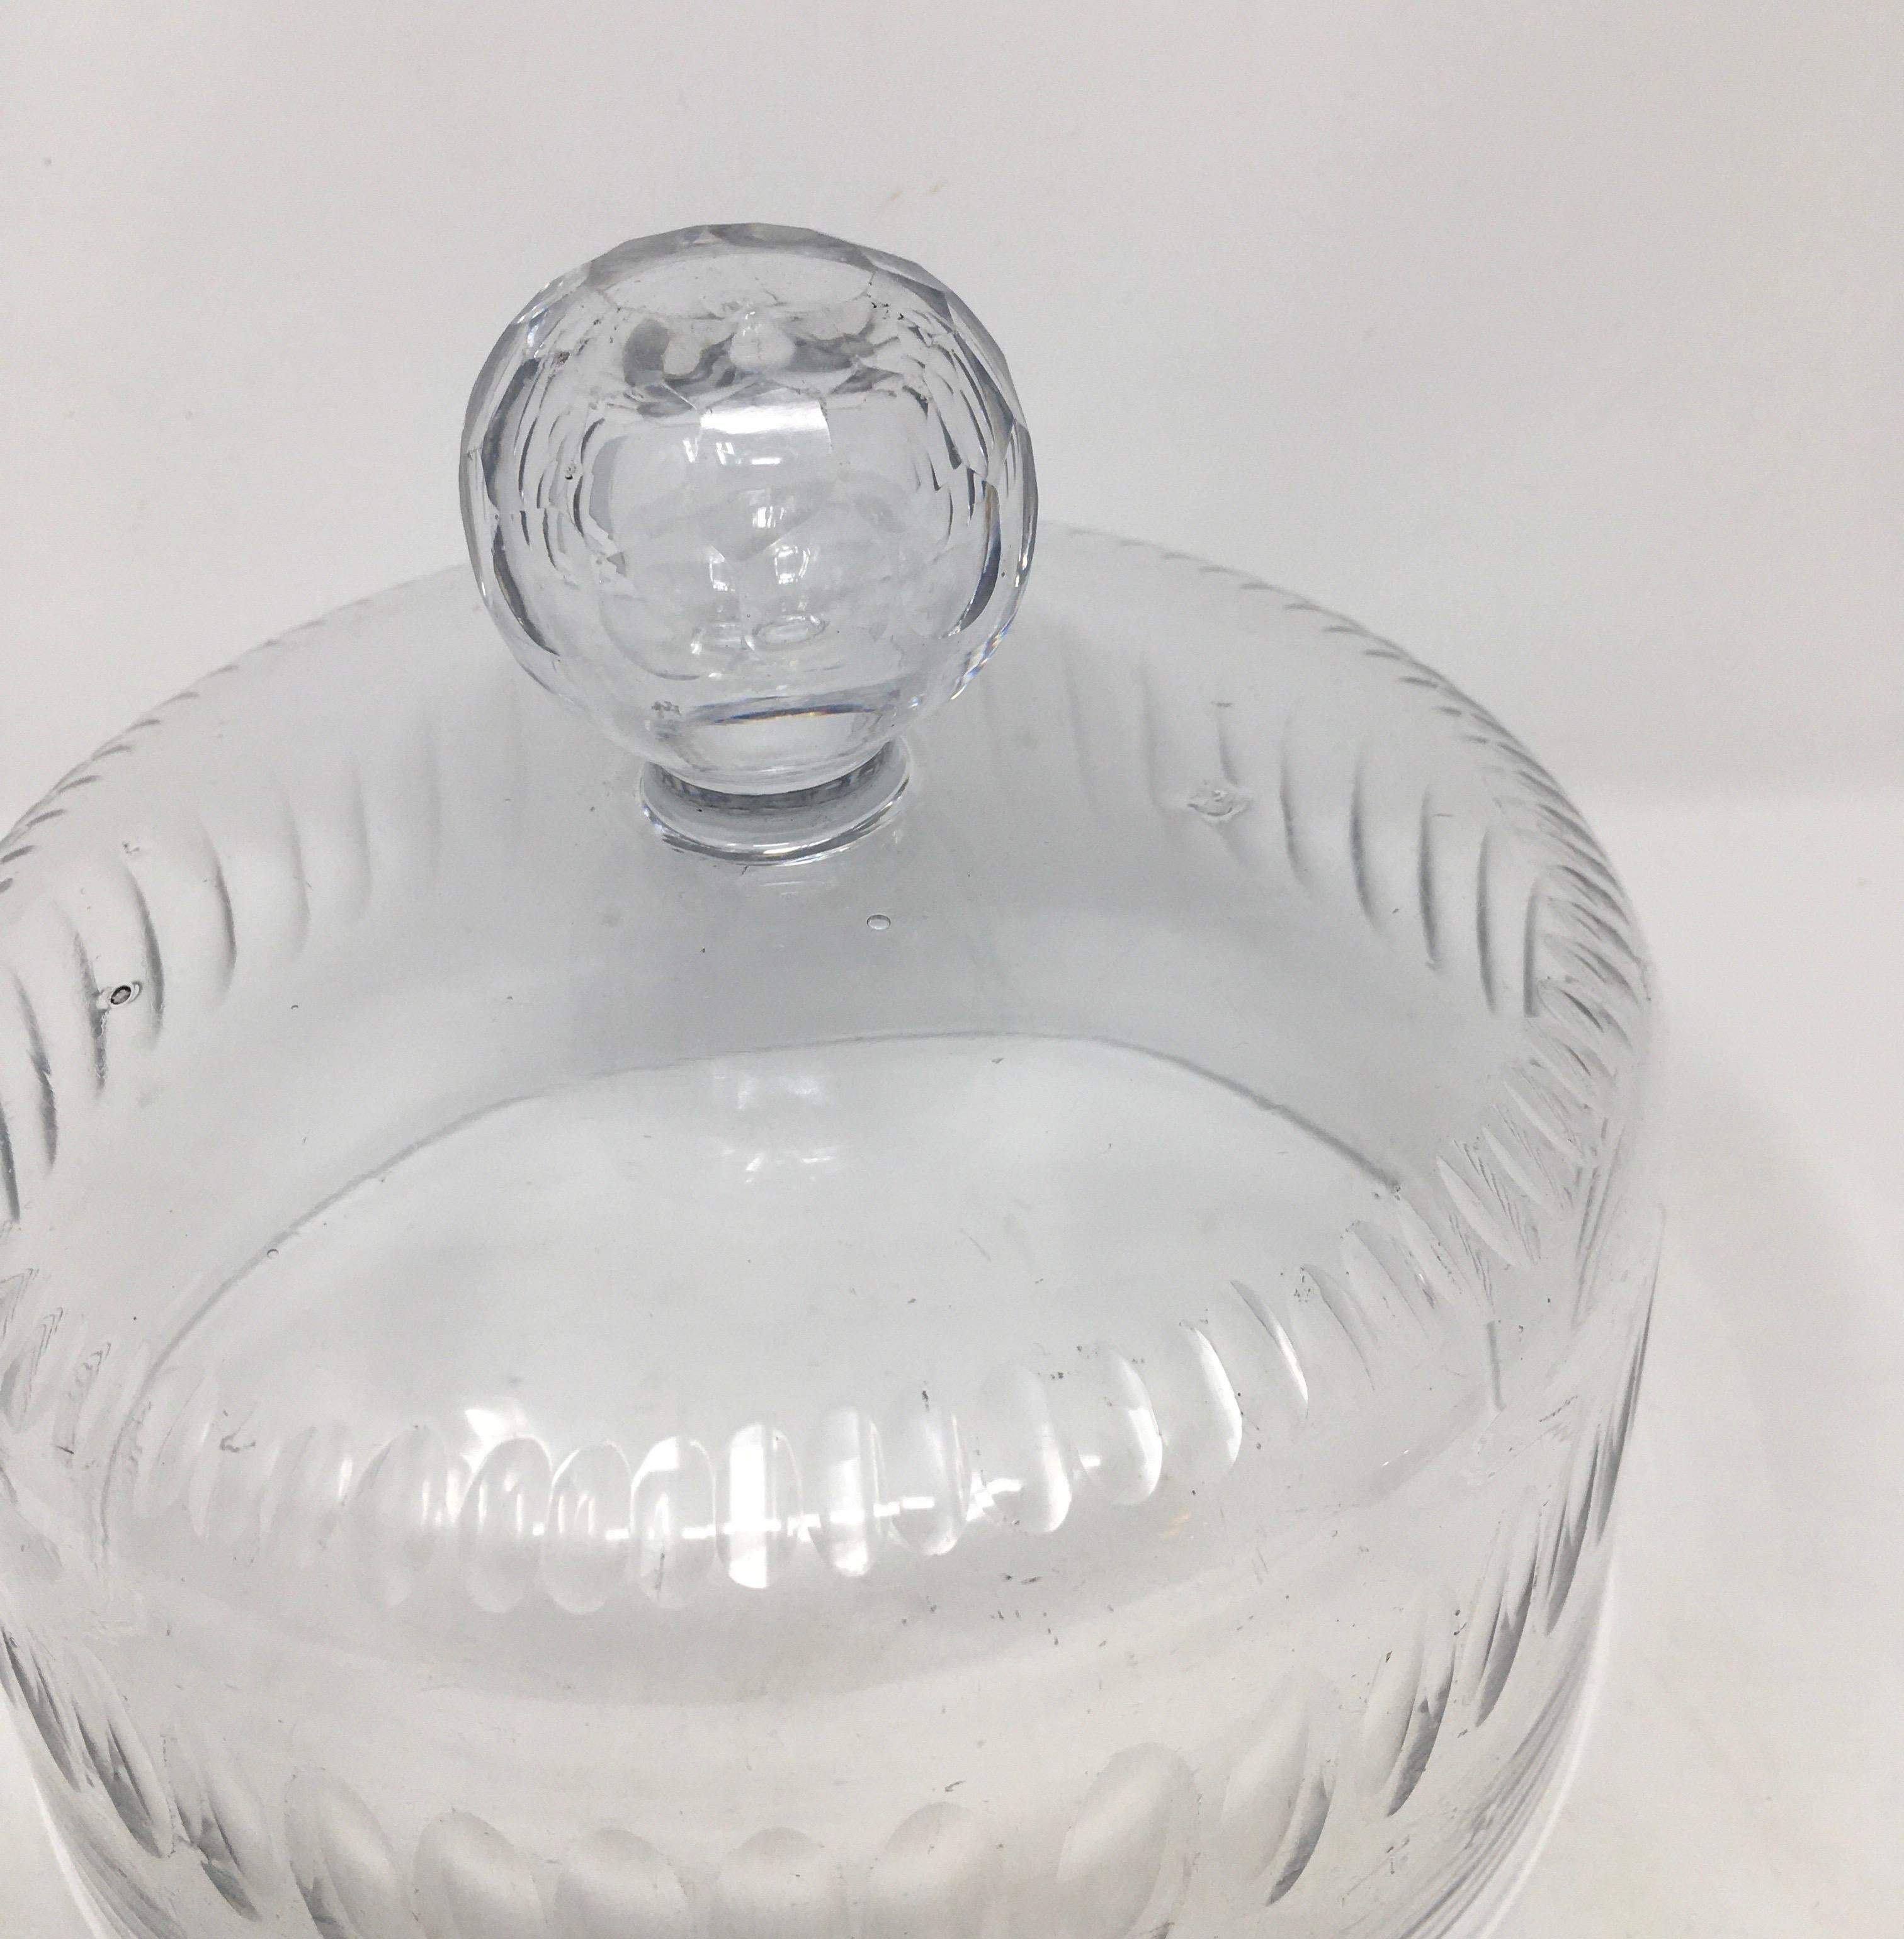 French antique Patisserie cut glass dome cloche with a solid glass knob handle. This cloche with beautiful cut glass detailing, was used in French Cheese Shop's to cover and display cheeses.
  